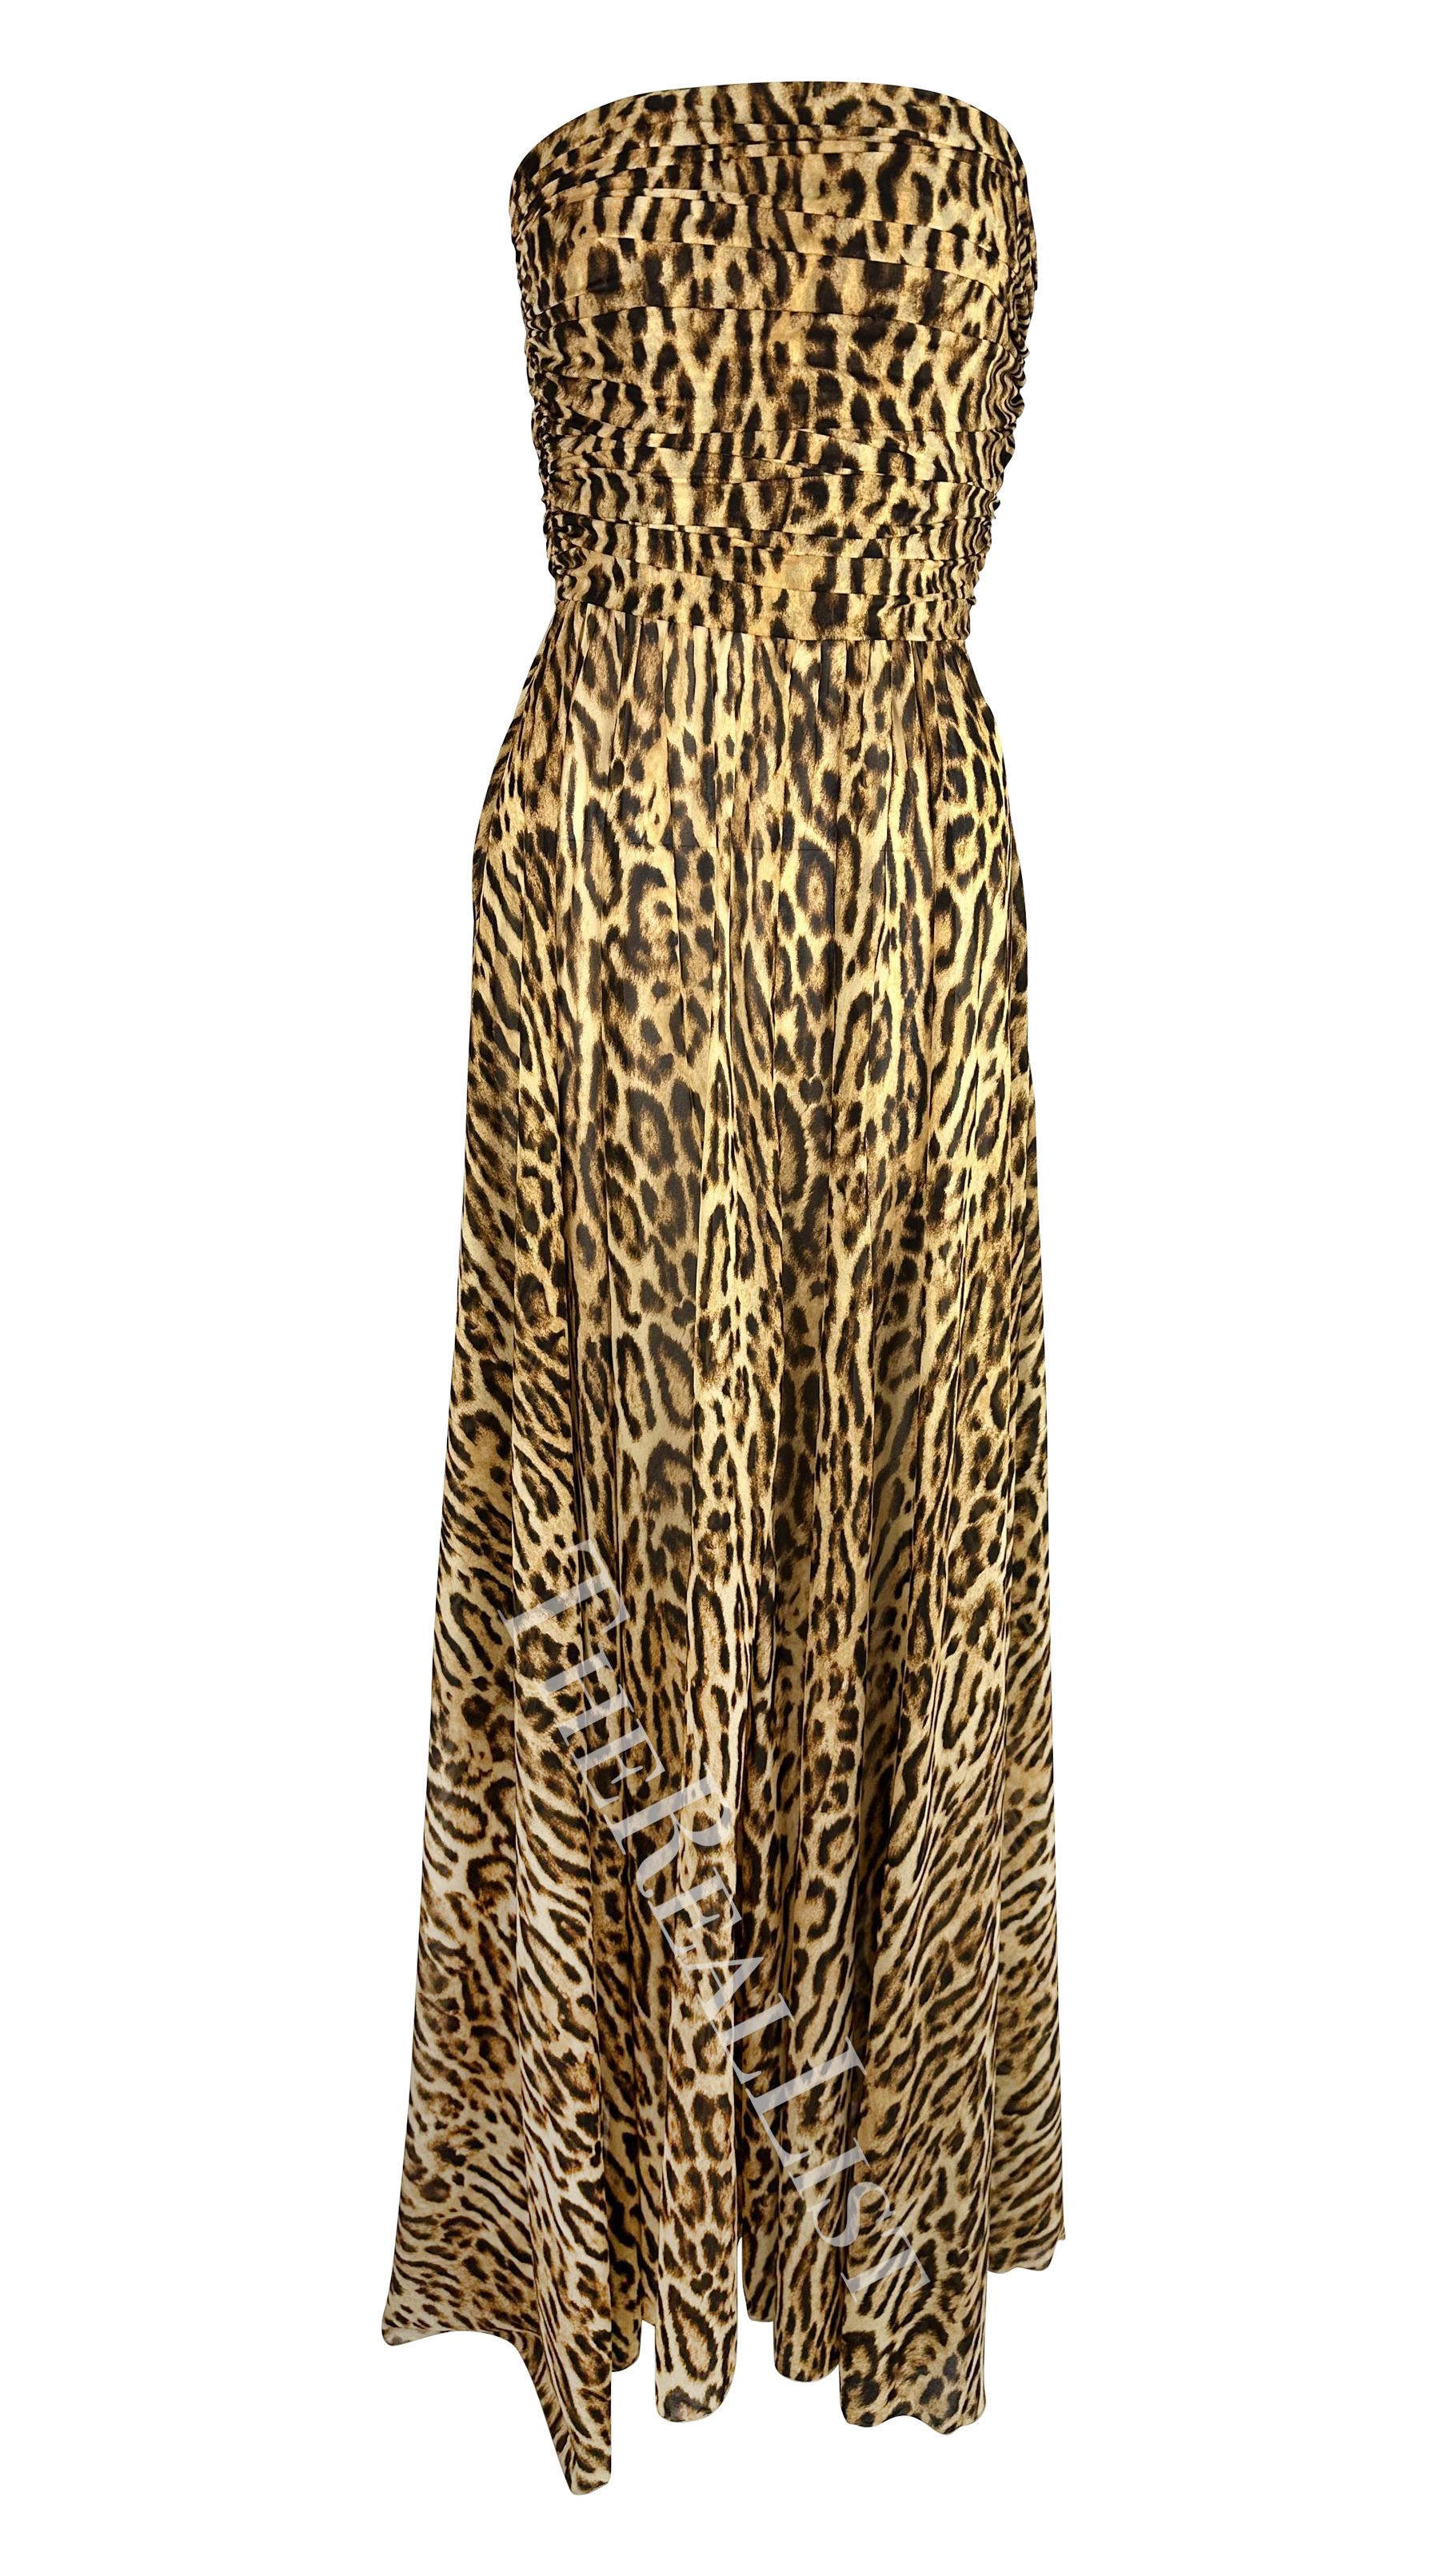 NWT F/W 2004 Celine by Michael Kors Runway Strapless Cheetah Print Gown  In Excellent Condition For Sale In West Hollywood, CA